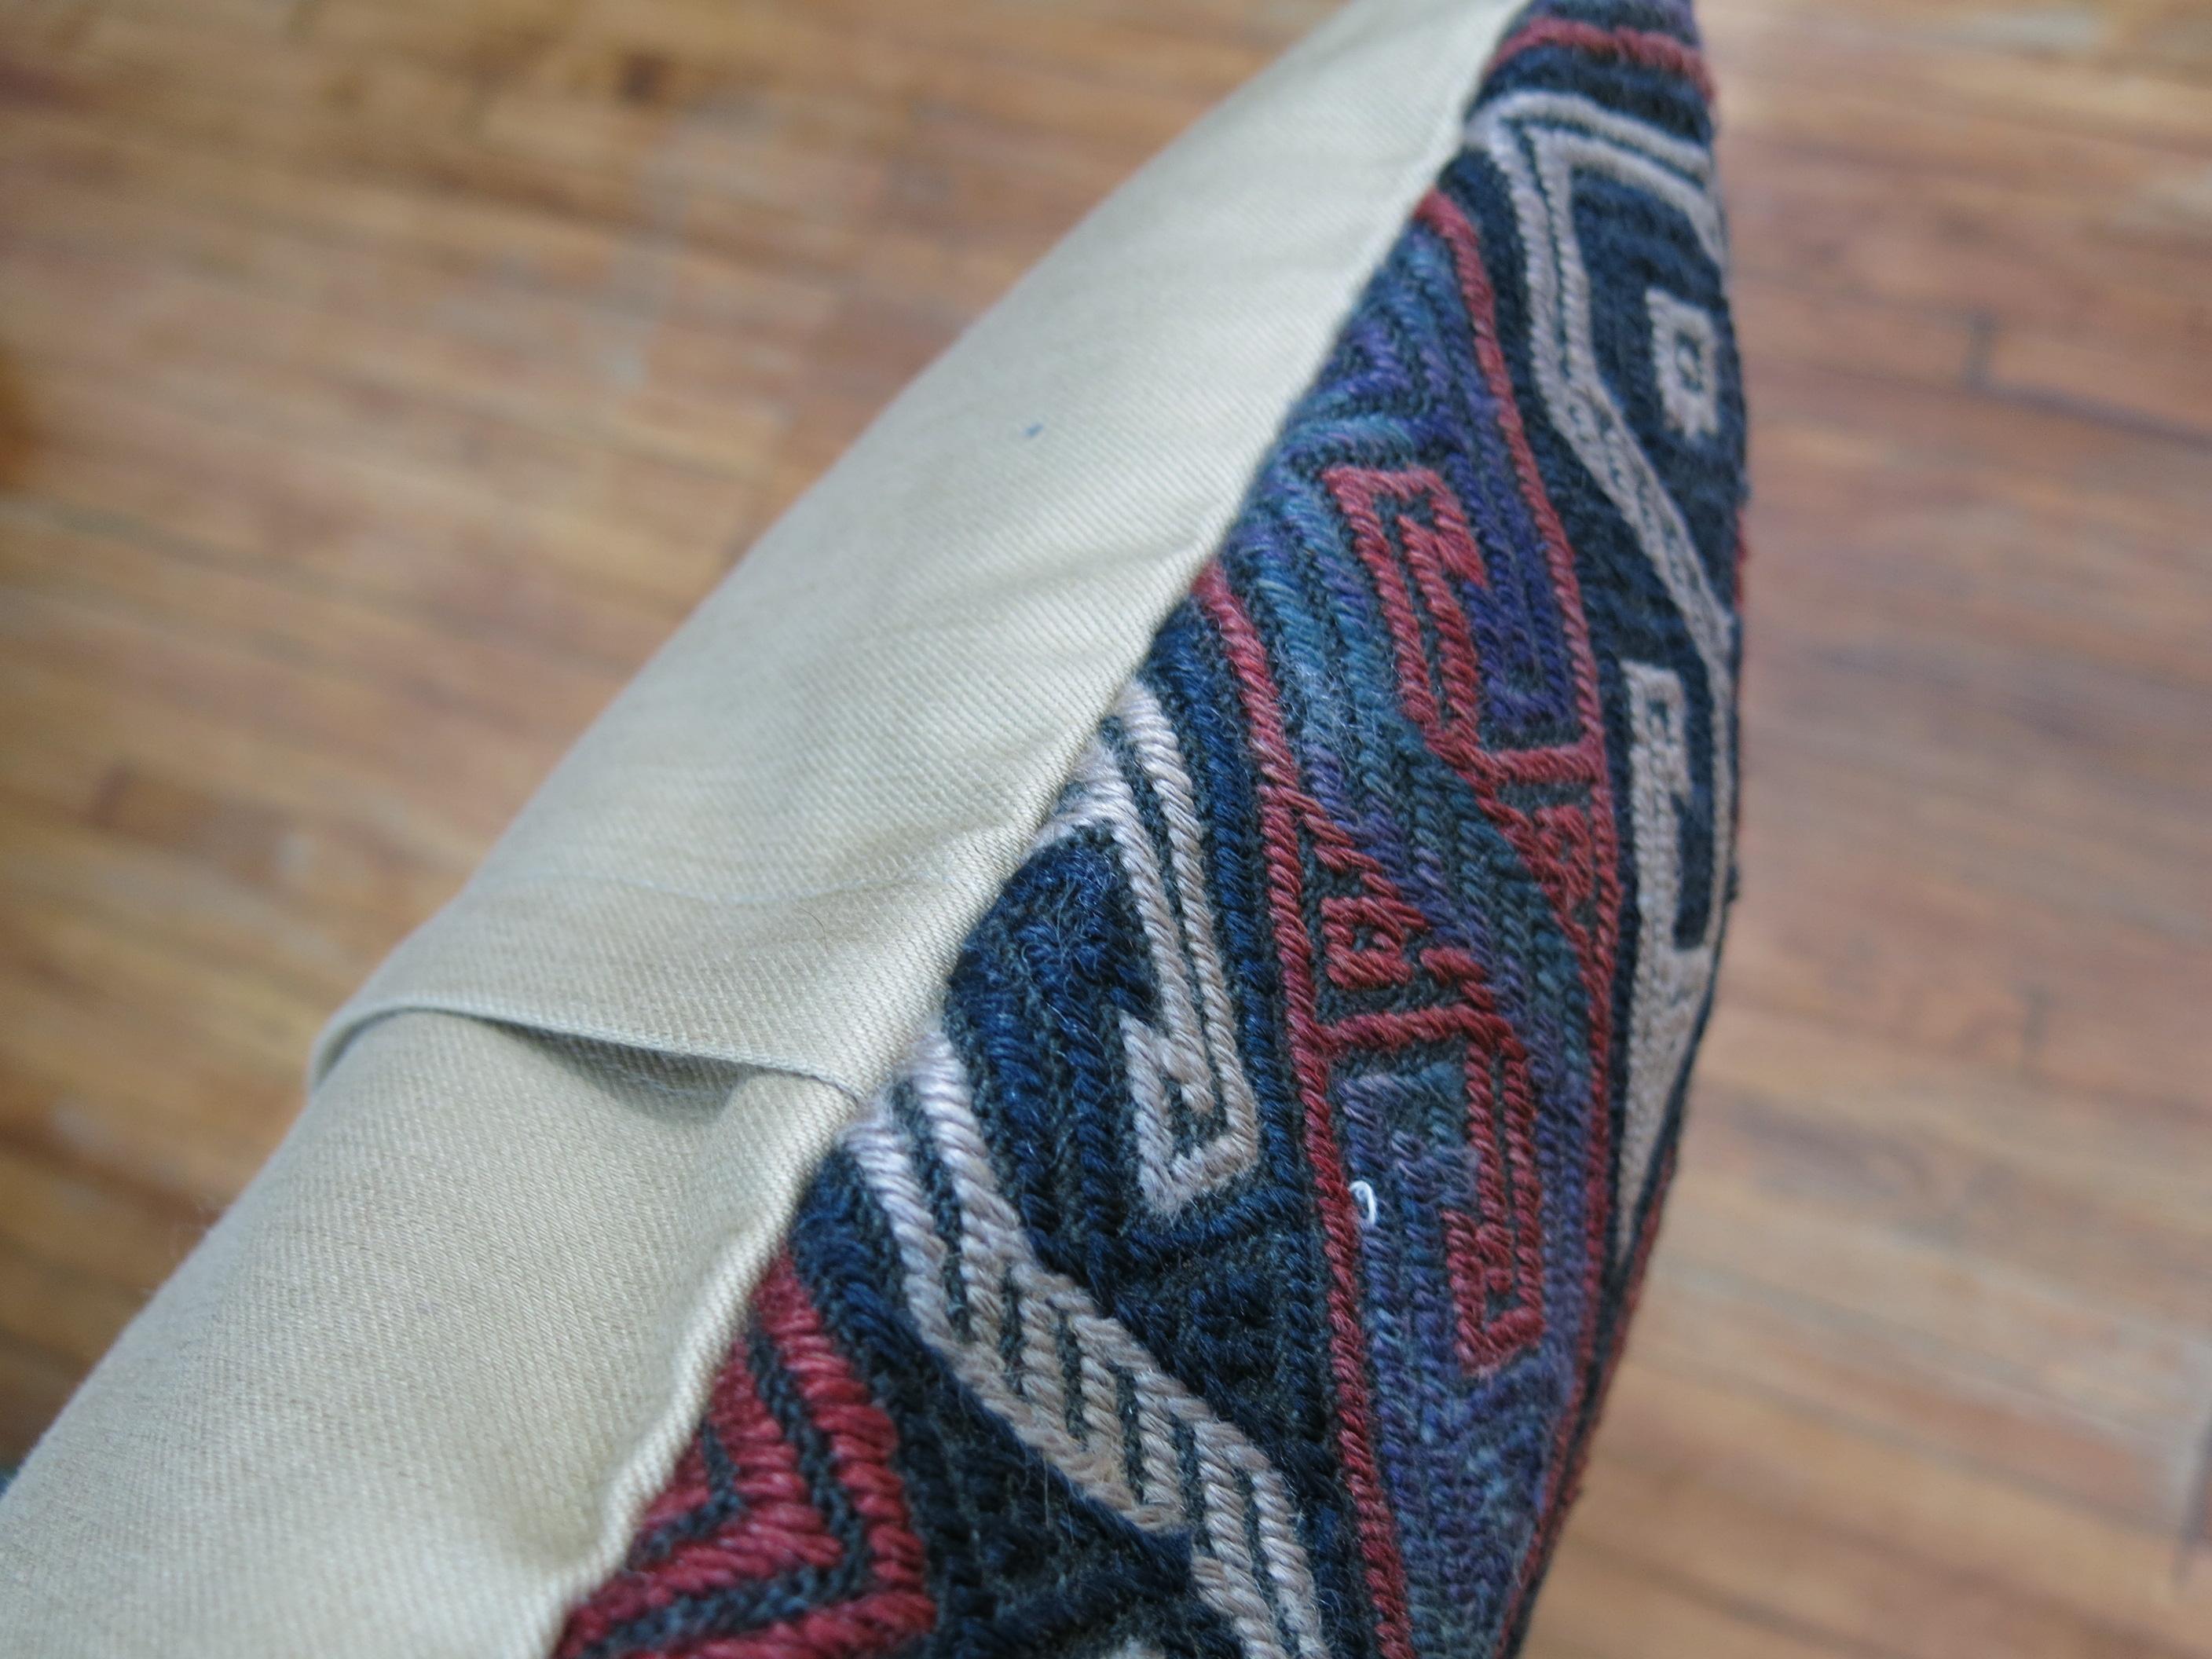 Pillow made from a vintage Traditional Turkish Kilim accents in soft red, purple, ivory and green.
Measures: 19